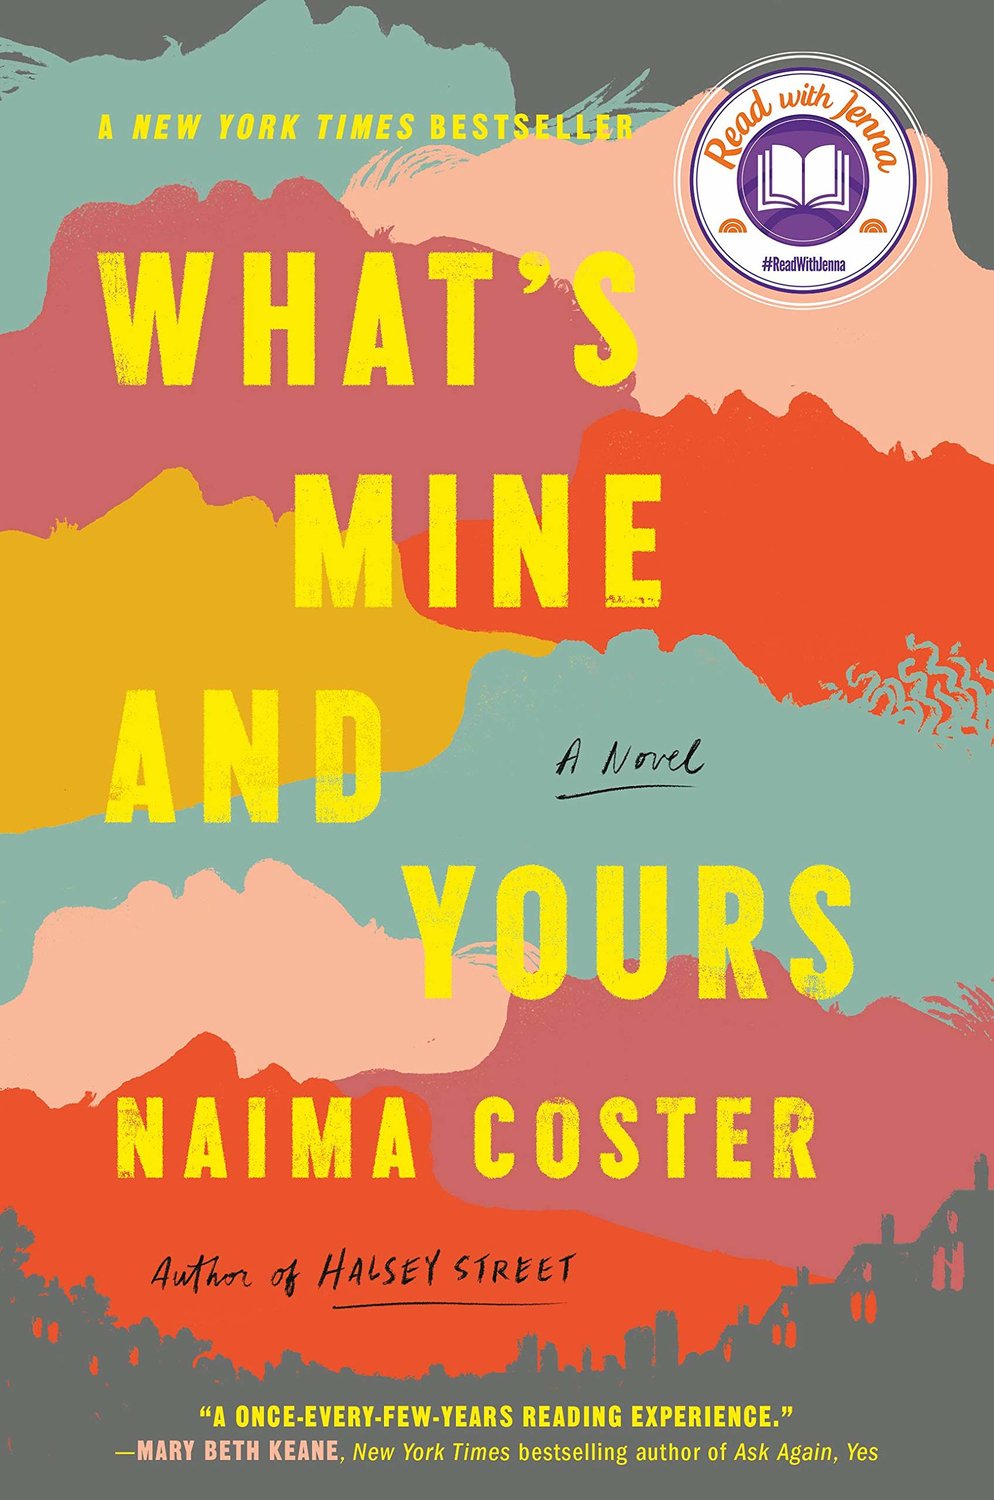 4. “What’s Mine and Yours” by Naima Coster